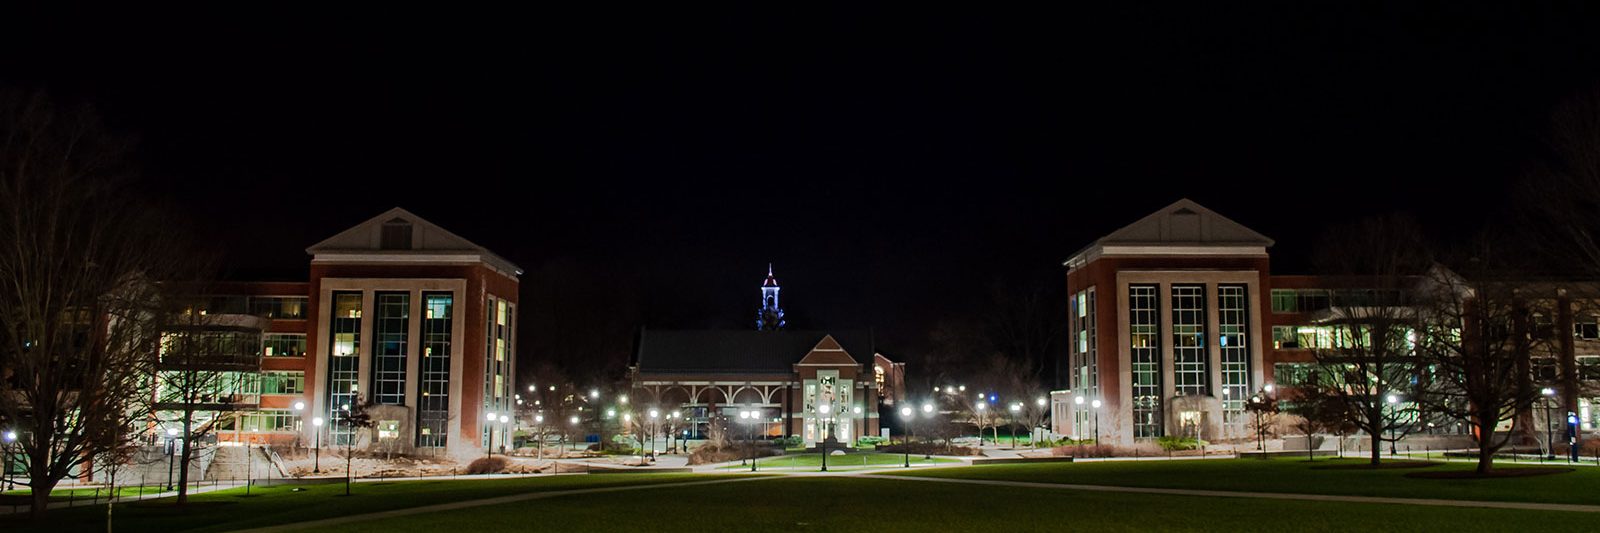 UConn Storrs mall at night.